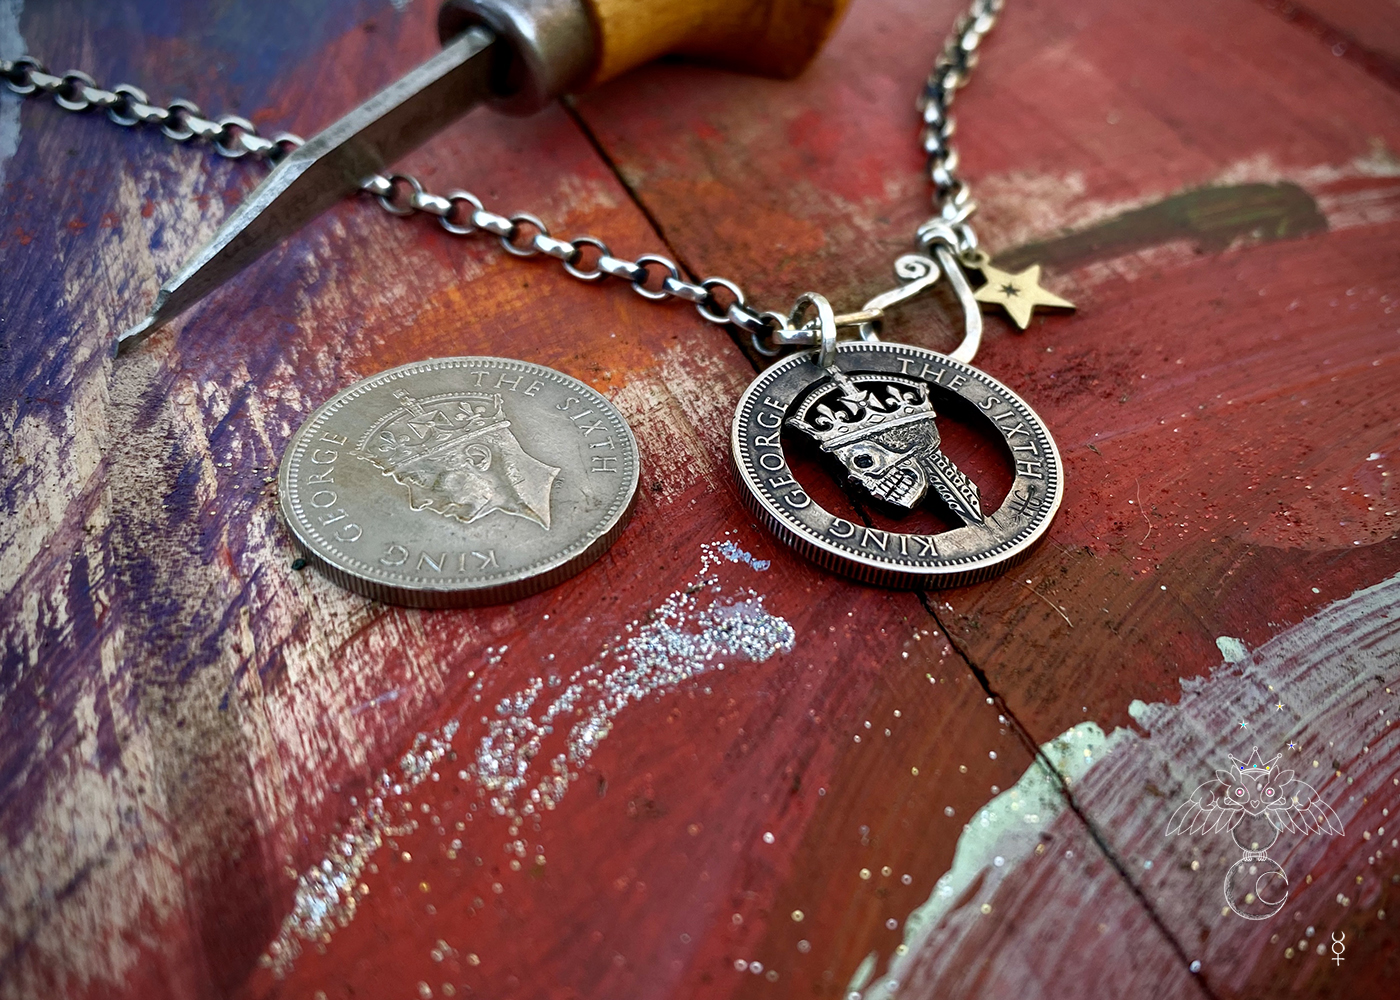 once we were kings skull coin necklace pendanr